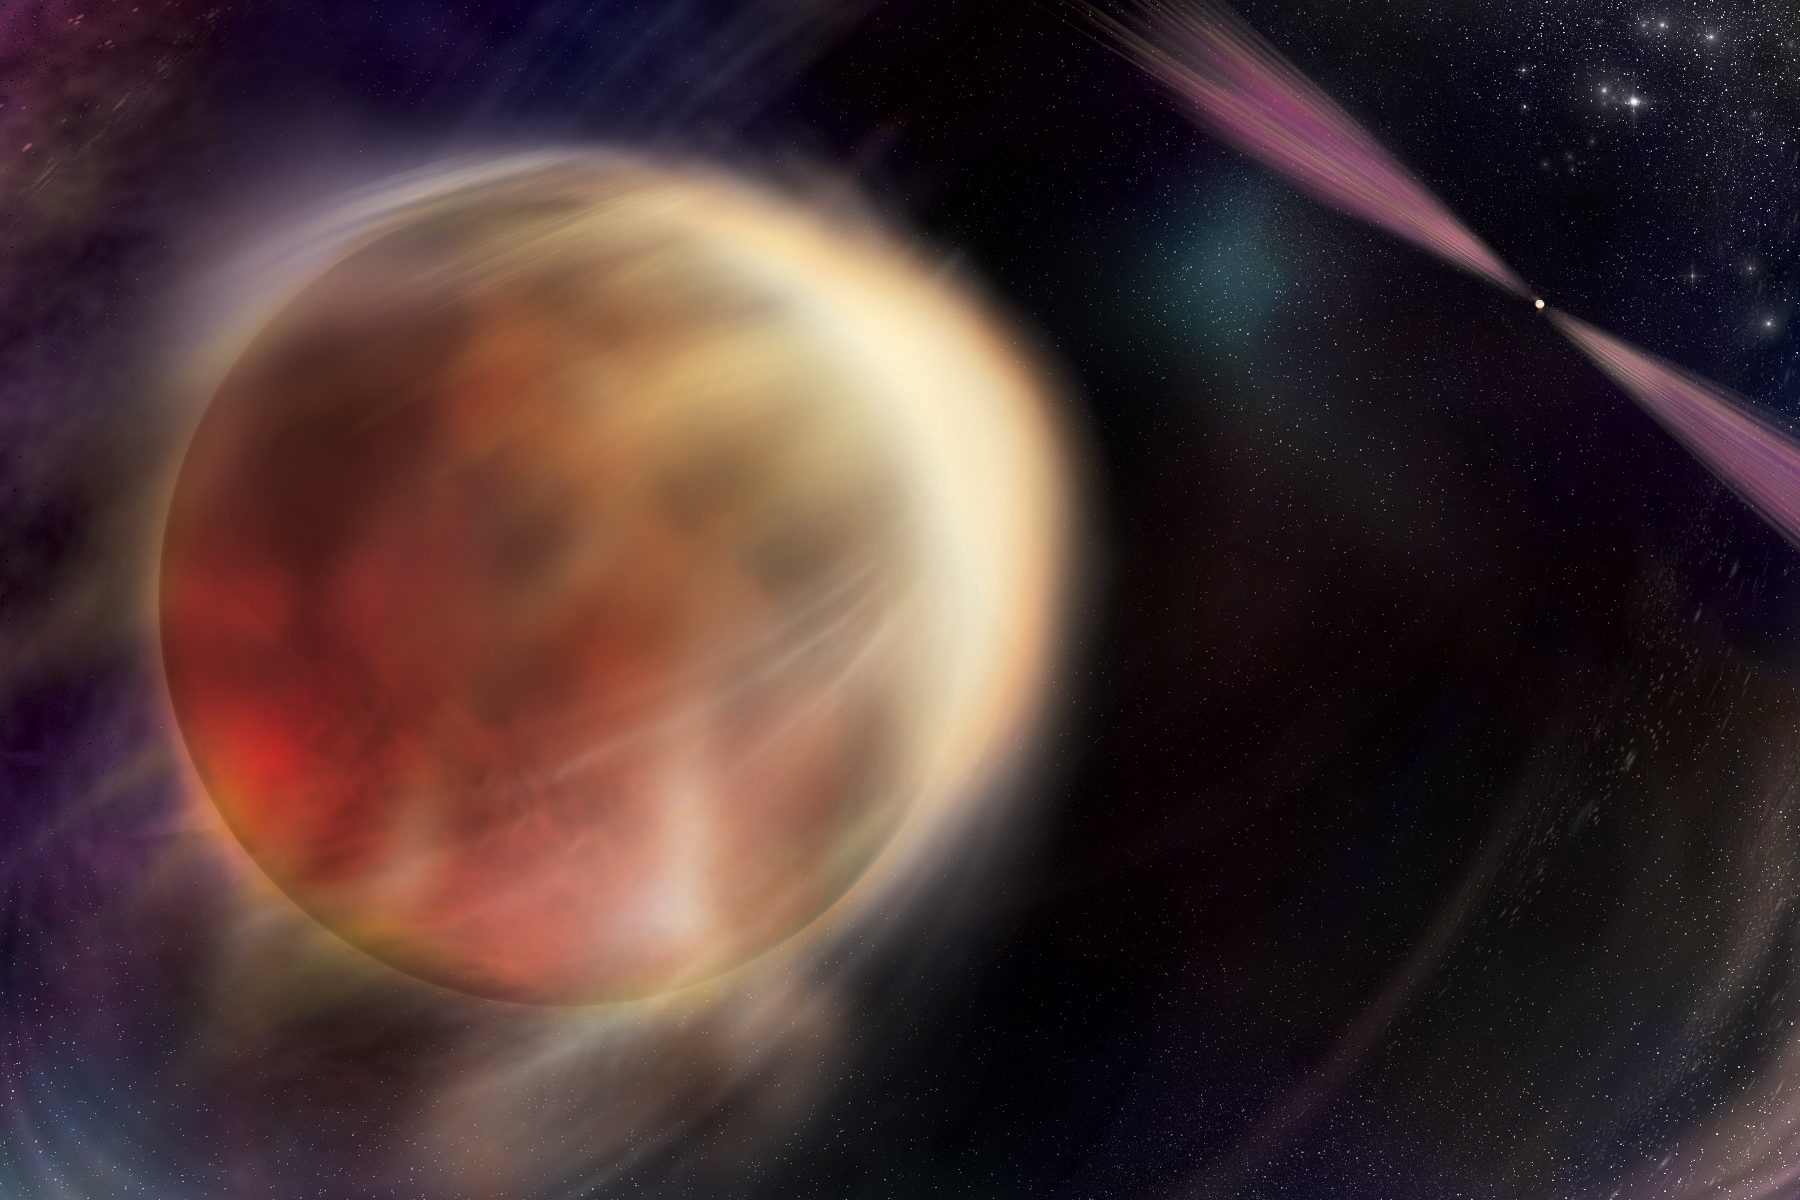 Streams of material blow off an orange-yellow in the foreground. In the distance, a pulsar rotates like a lighthouse, emitting beams of magenta light. The background is black, purple, and speckled with stars.